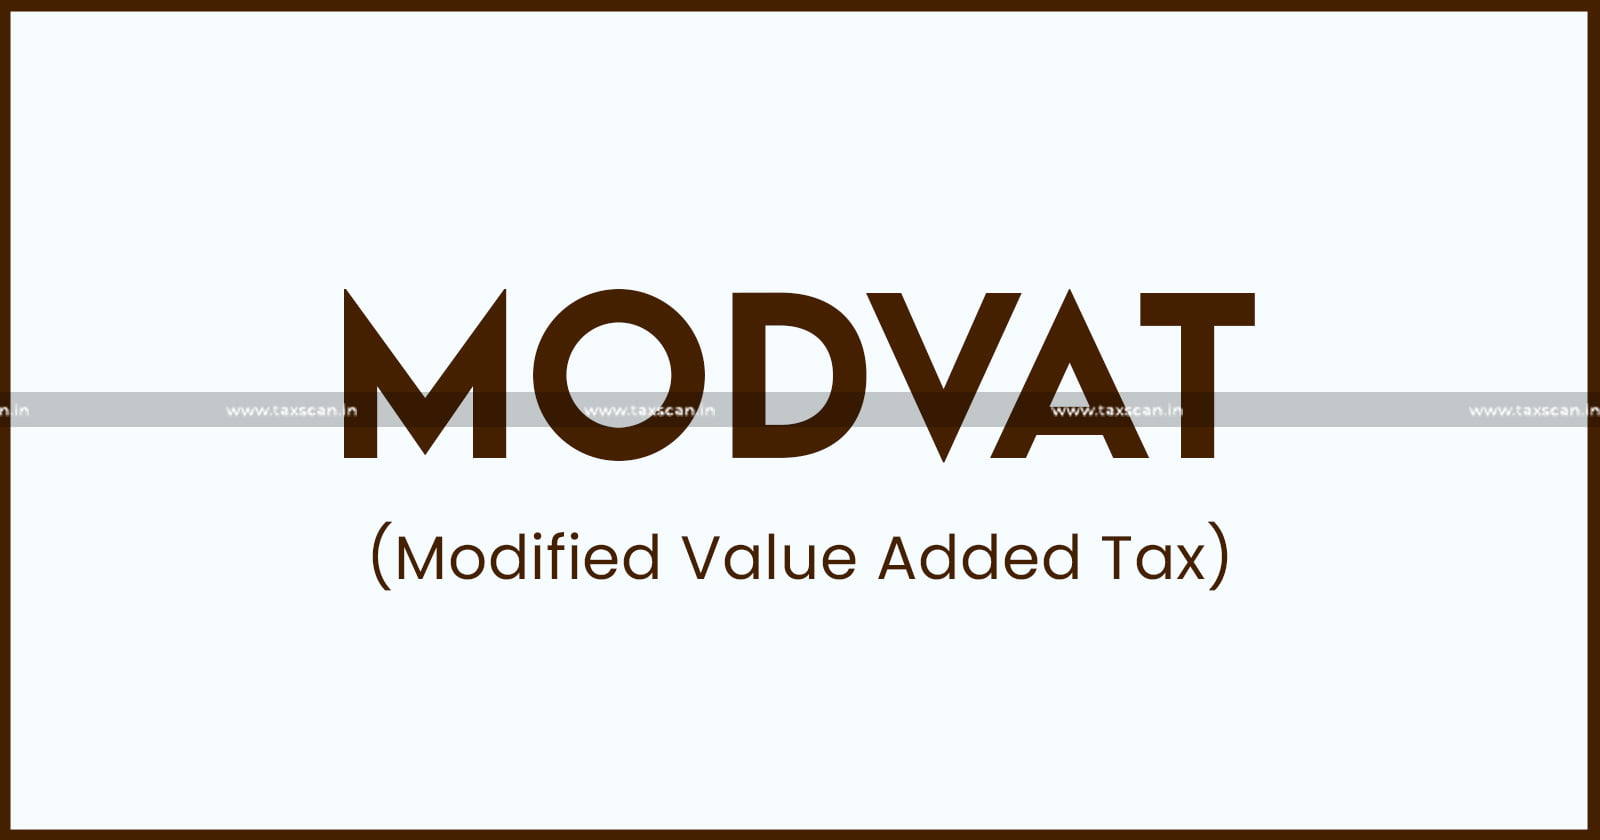 Modified value added tax credit- service tax -Goods- Inputs- Section 57A of Central Excise Rules 1944- CESTAT- central excise rules-MODVAT-taxscan